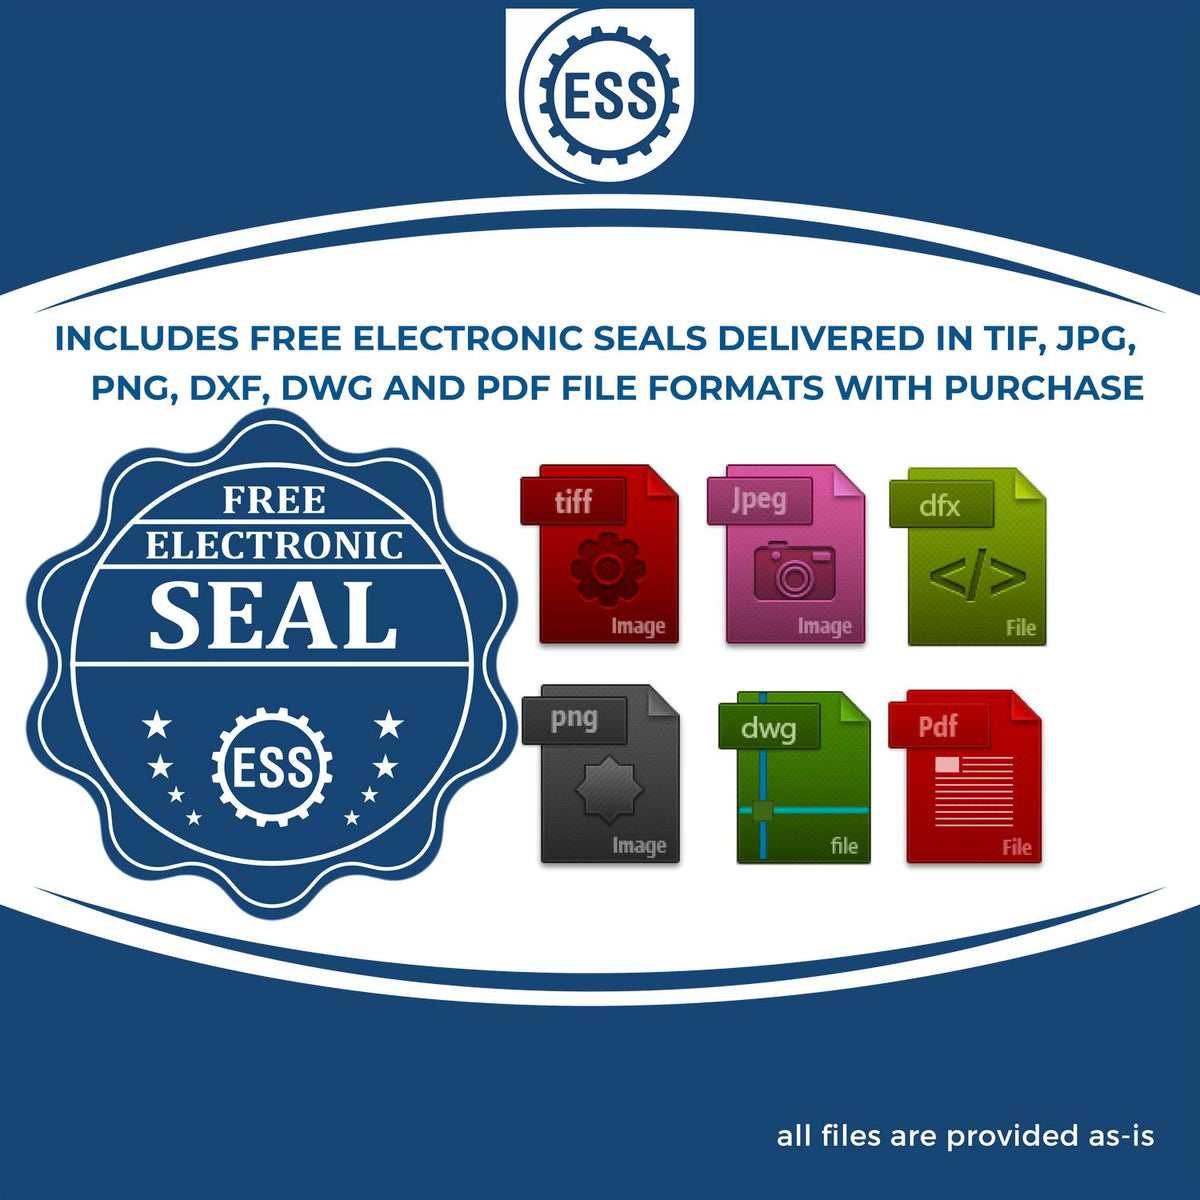 An infographic for the free electronic seal for the Slim Pre-Inked Wisconsin Architect Seal Stamp illustrating the different file type icons such as DXF, DWG, TIF, JPG and PNG.